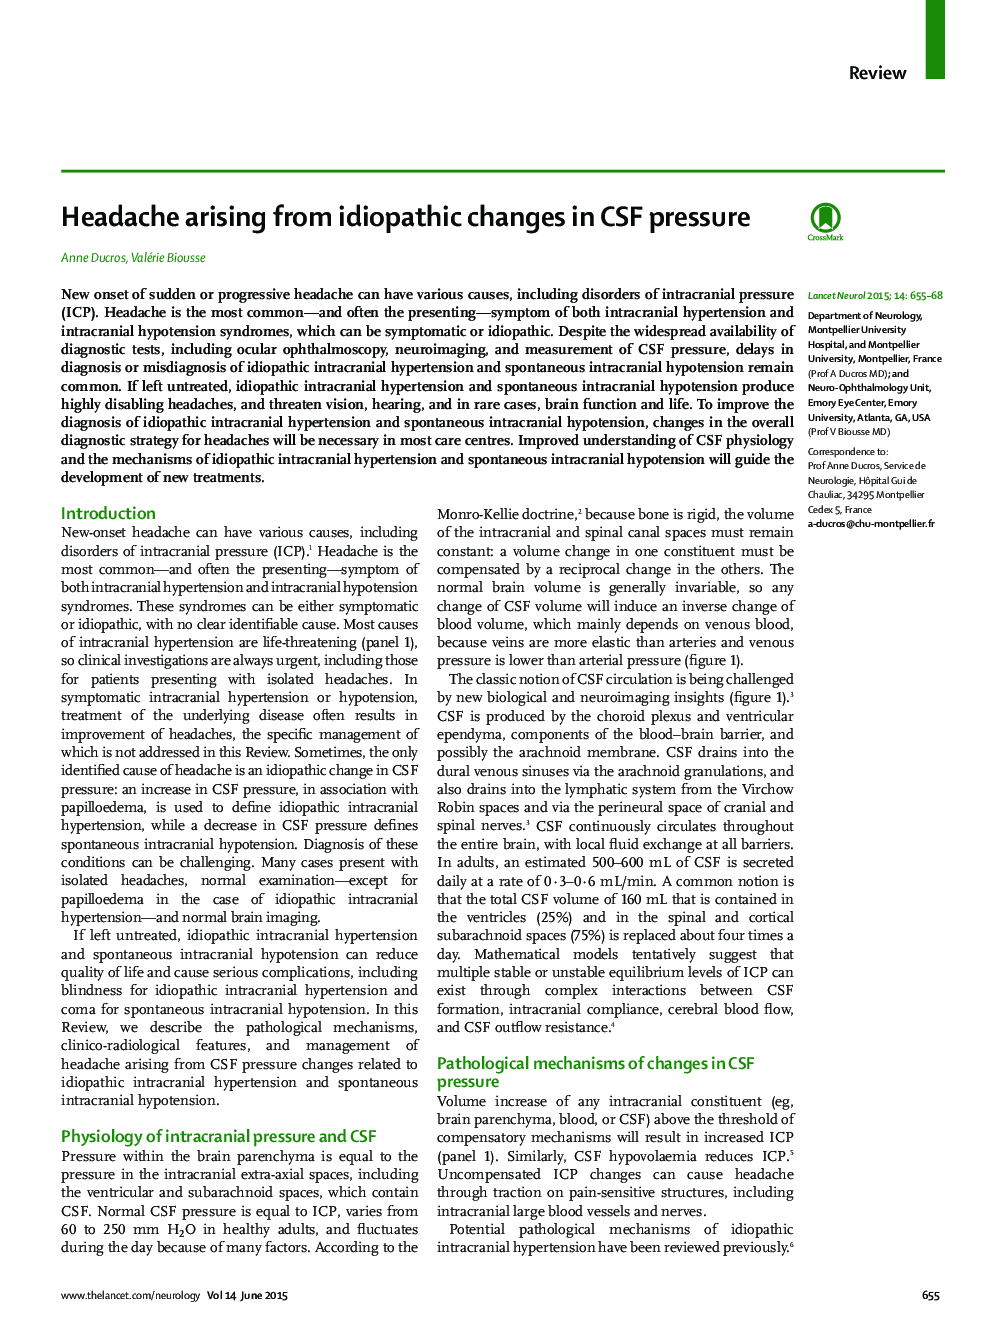 Headache arising from idiopathic changes in CSF pressure